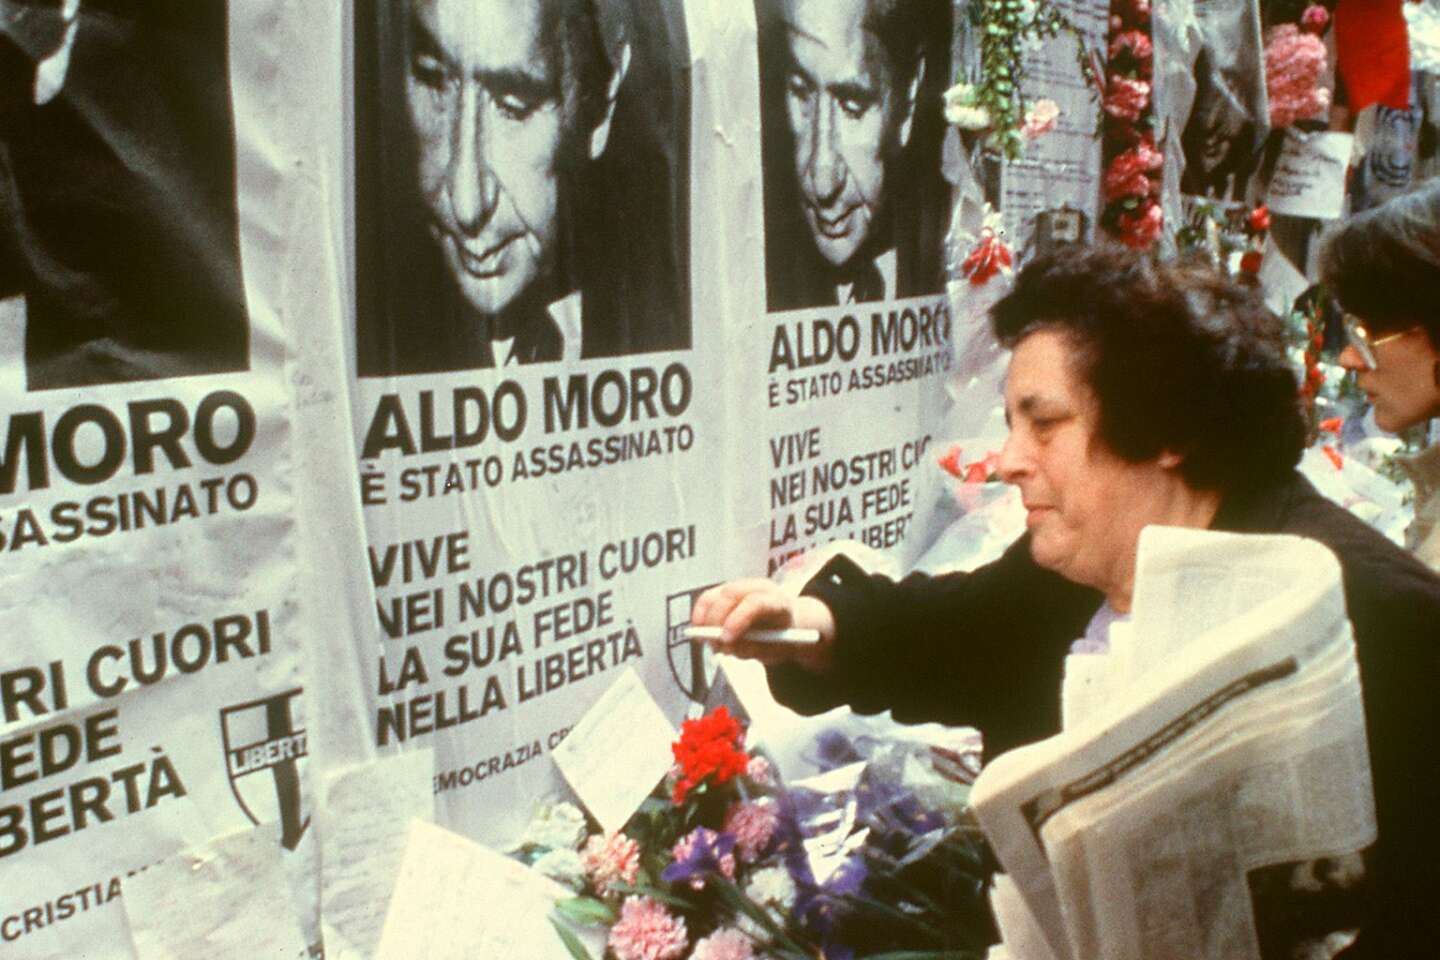 The Aldo Moro affair in the cinema, a frightening machine for fiction